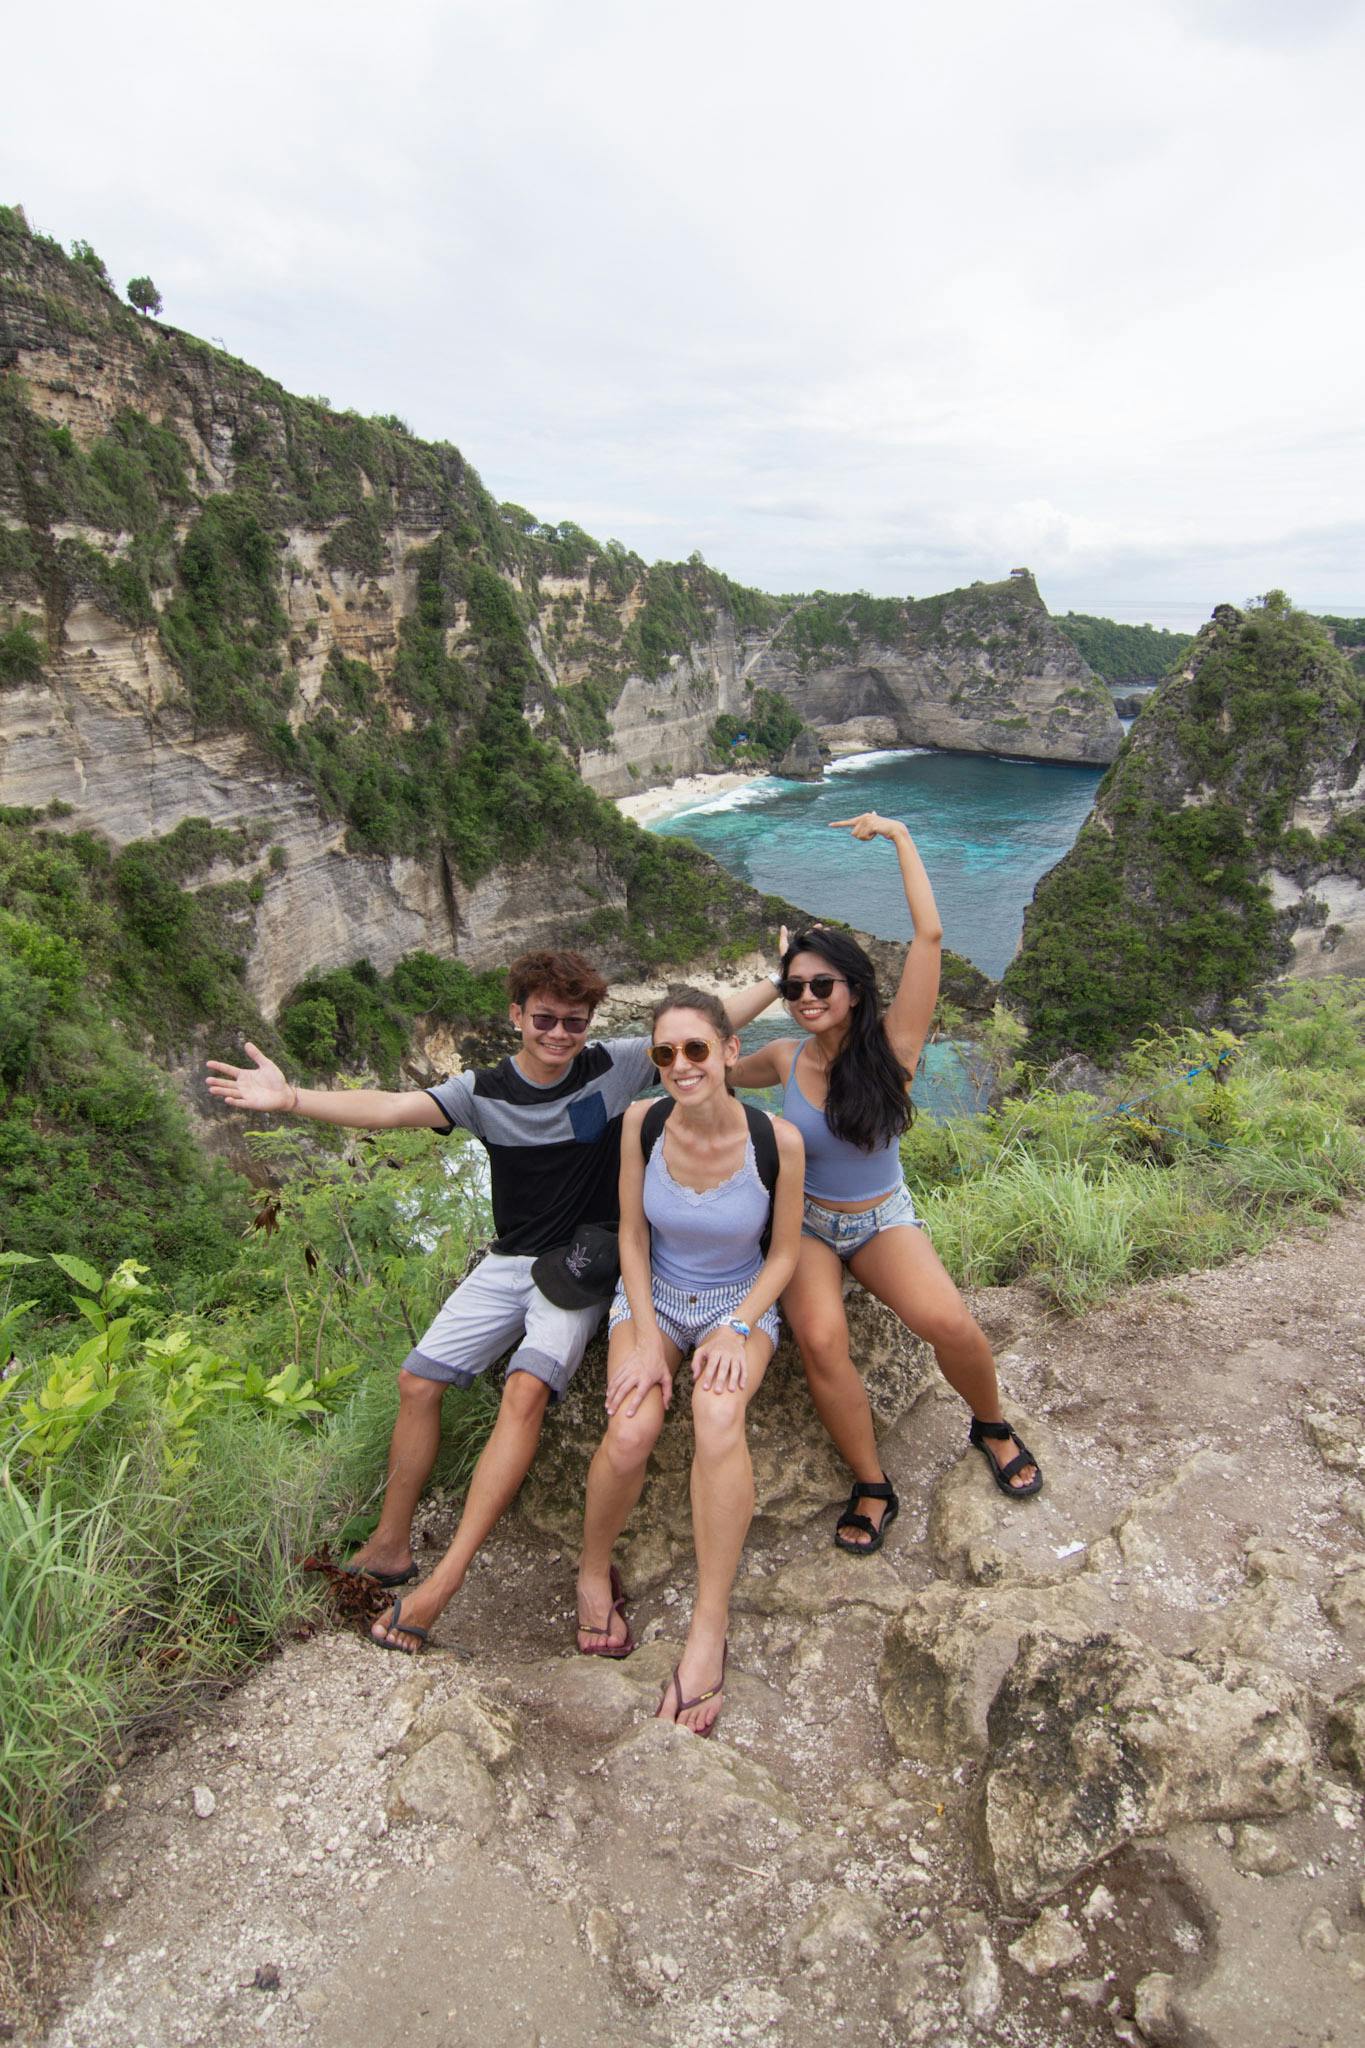 Get a local to take you around and support Nusa Penida's local community!